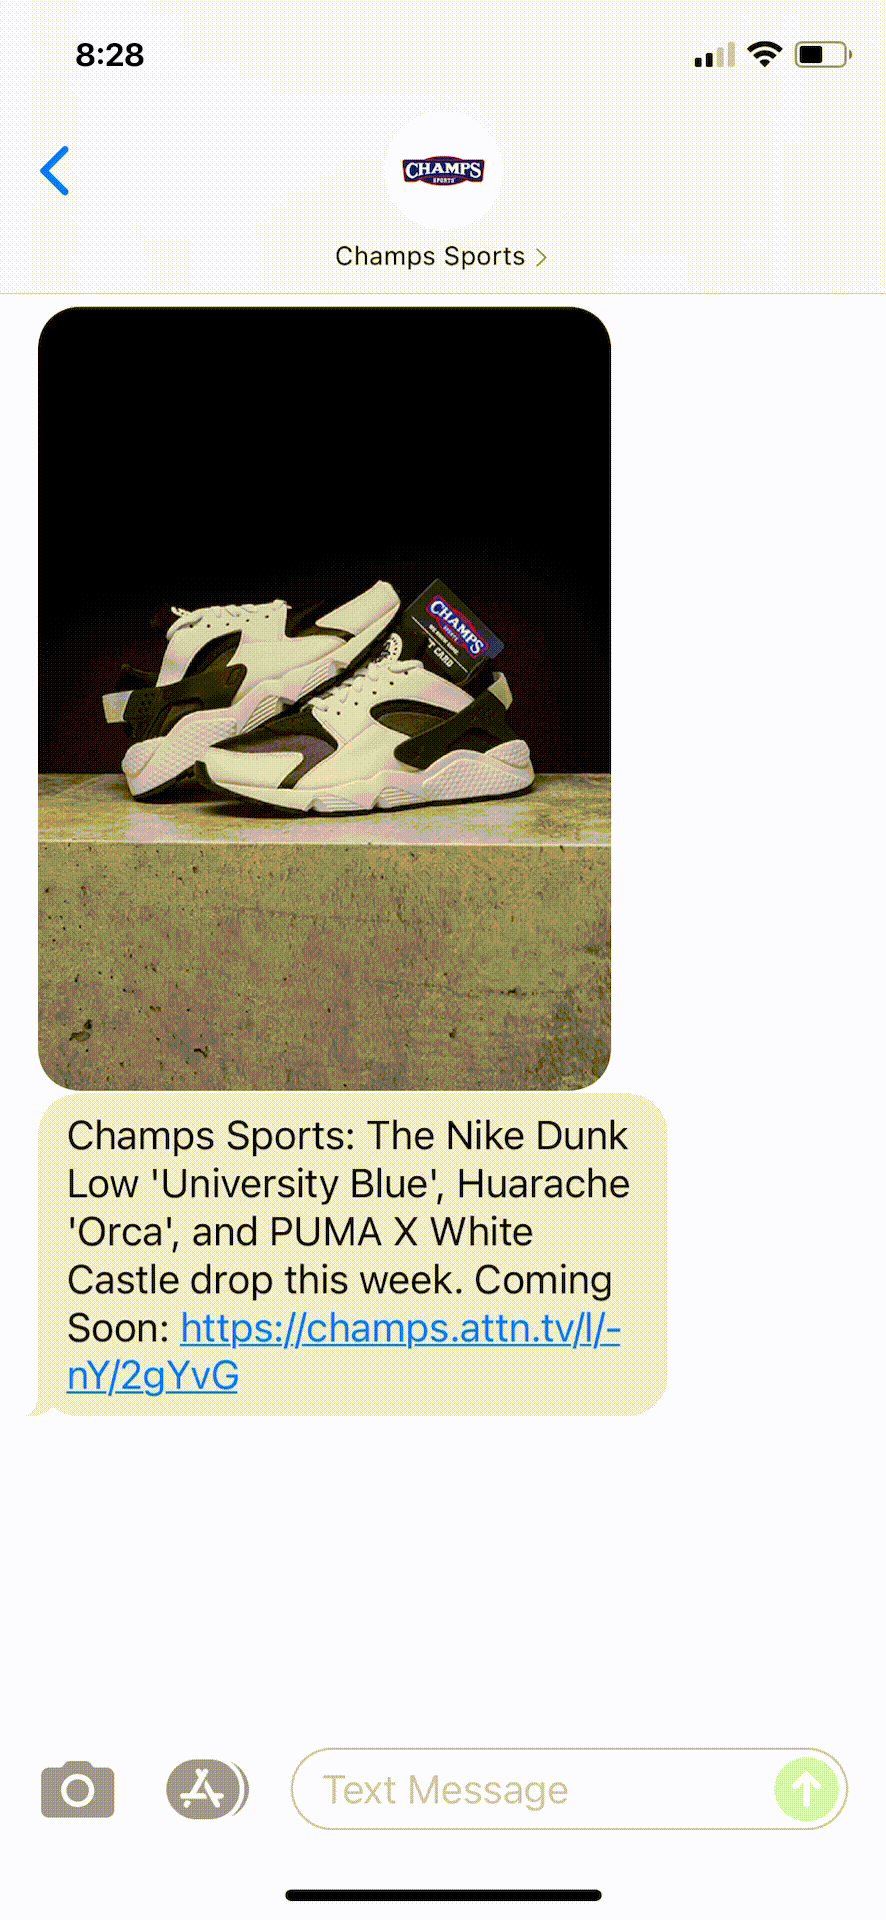 Champs-Sports-Text-Message-Marketing-Example-06.23.2021